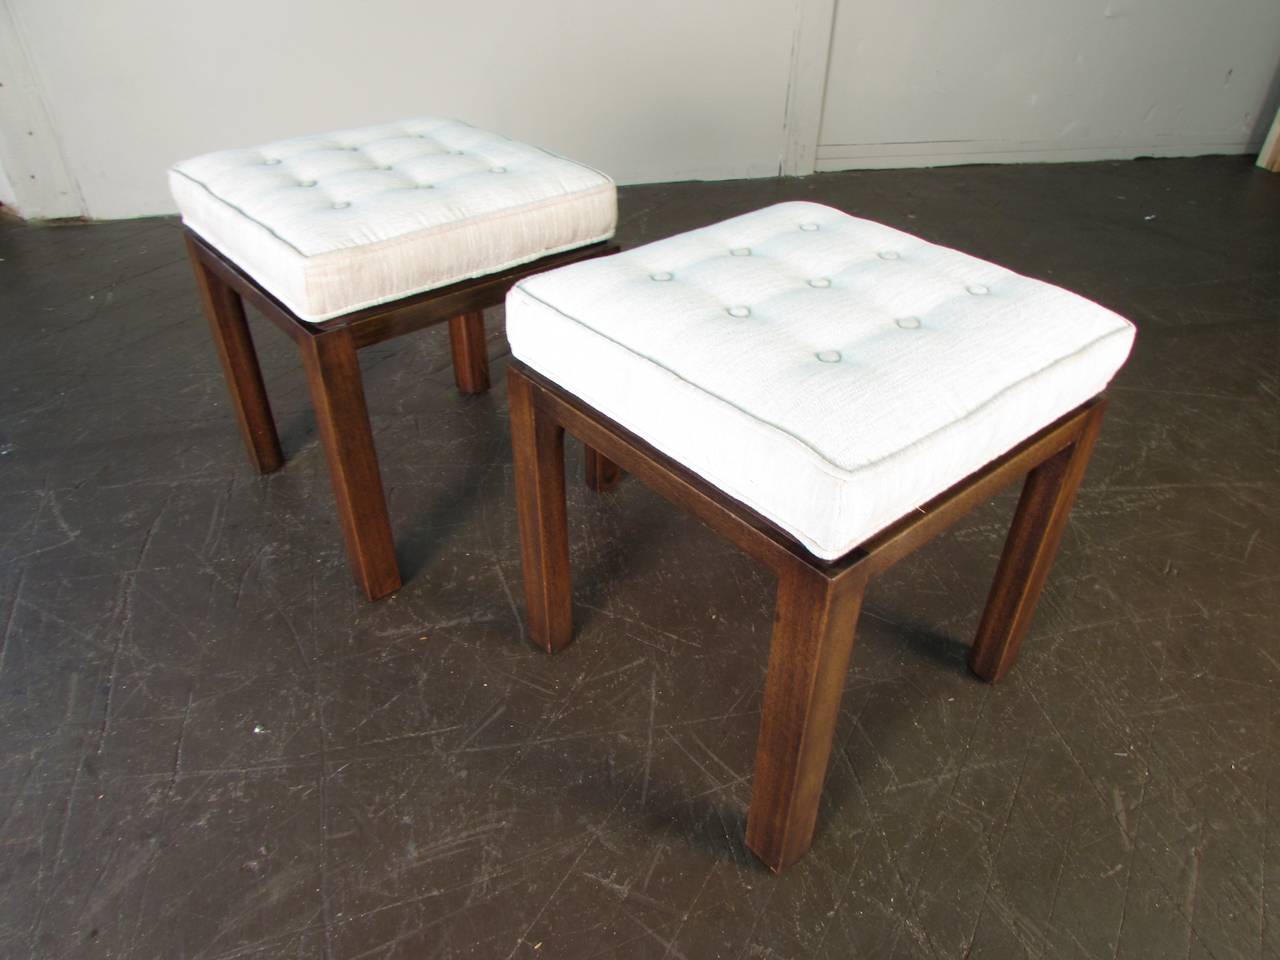 American Stately Pair of Signed Upholstered Stools or Benches by Harvey Probber, 1965